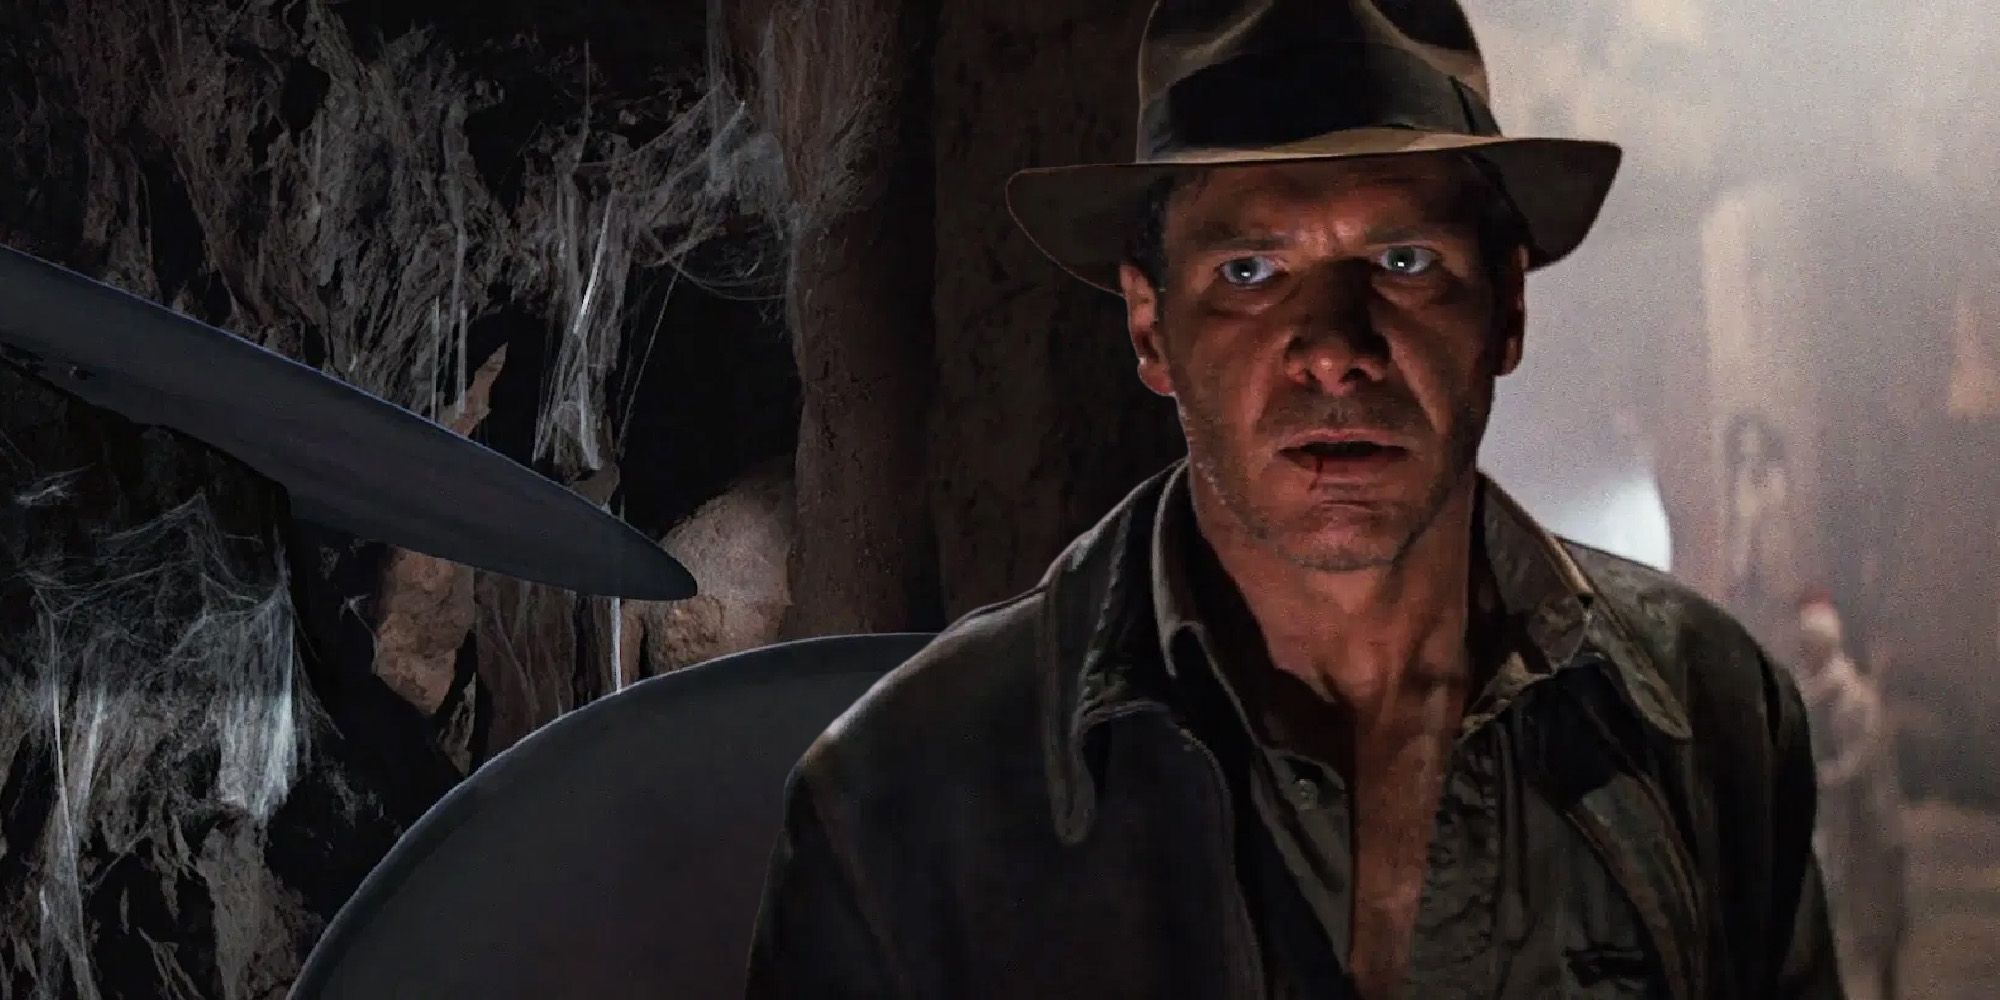 Indiana Jones And The Last Crusade's Holy Grail Plot-Hole Explained